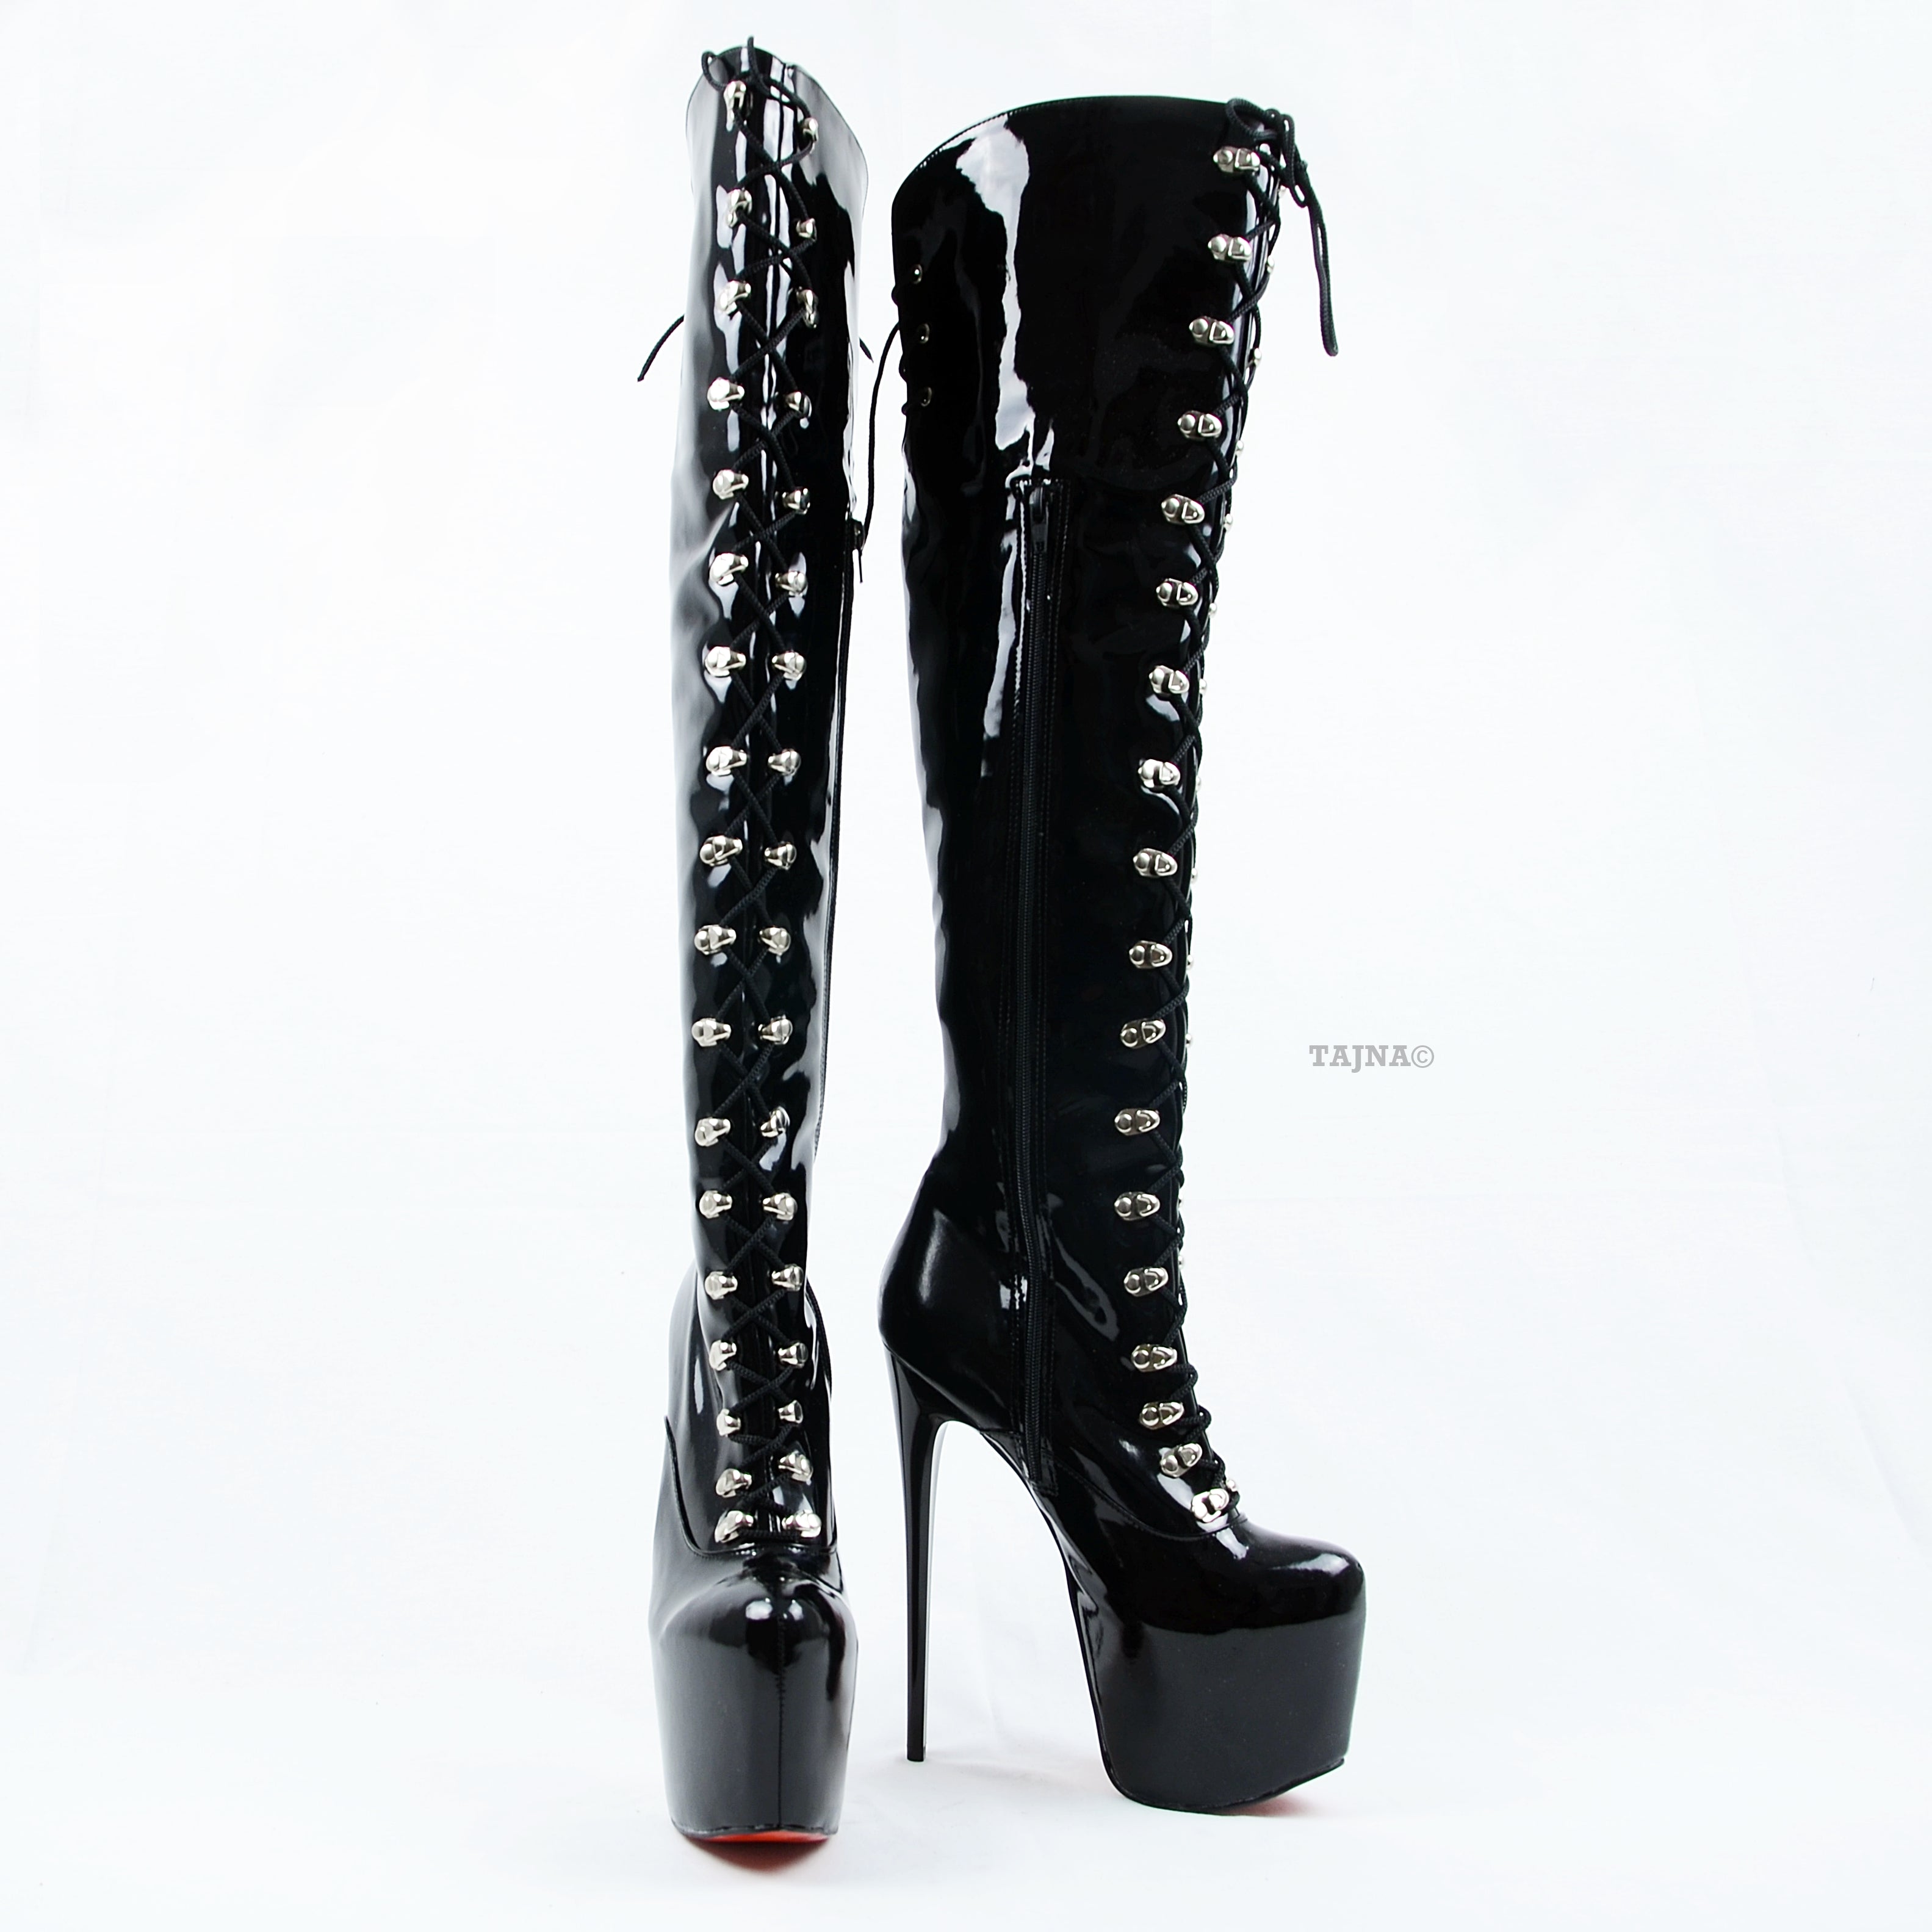 Black Patent Lace Up Military Style Heel Boots - Tajna Club